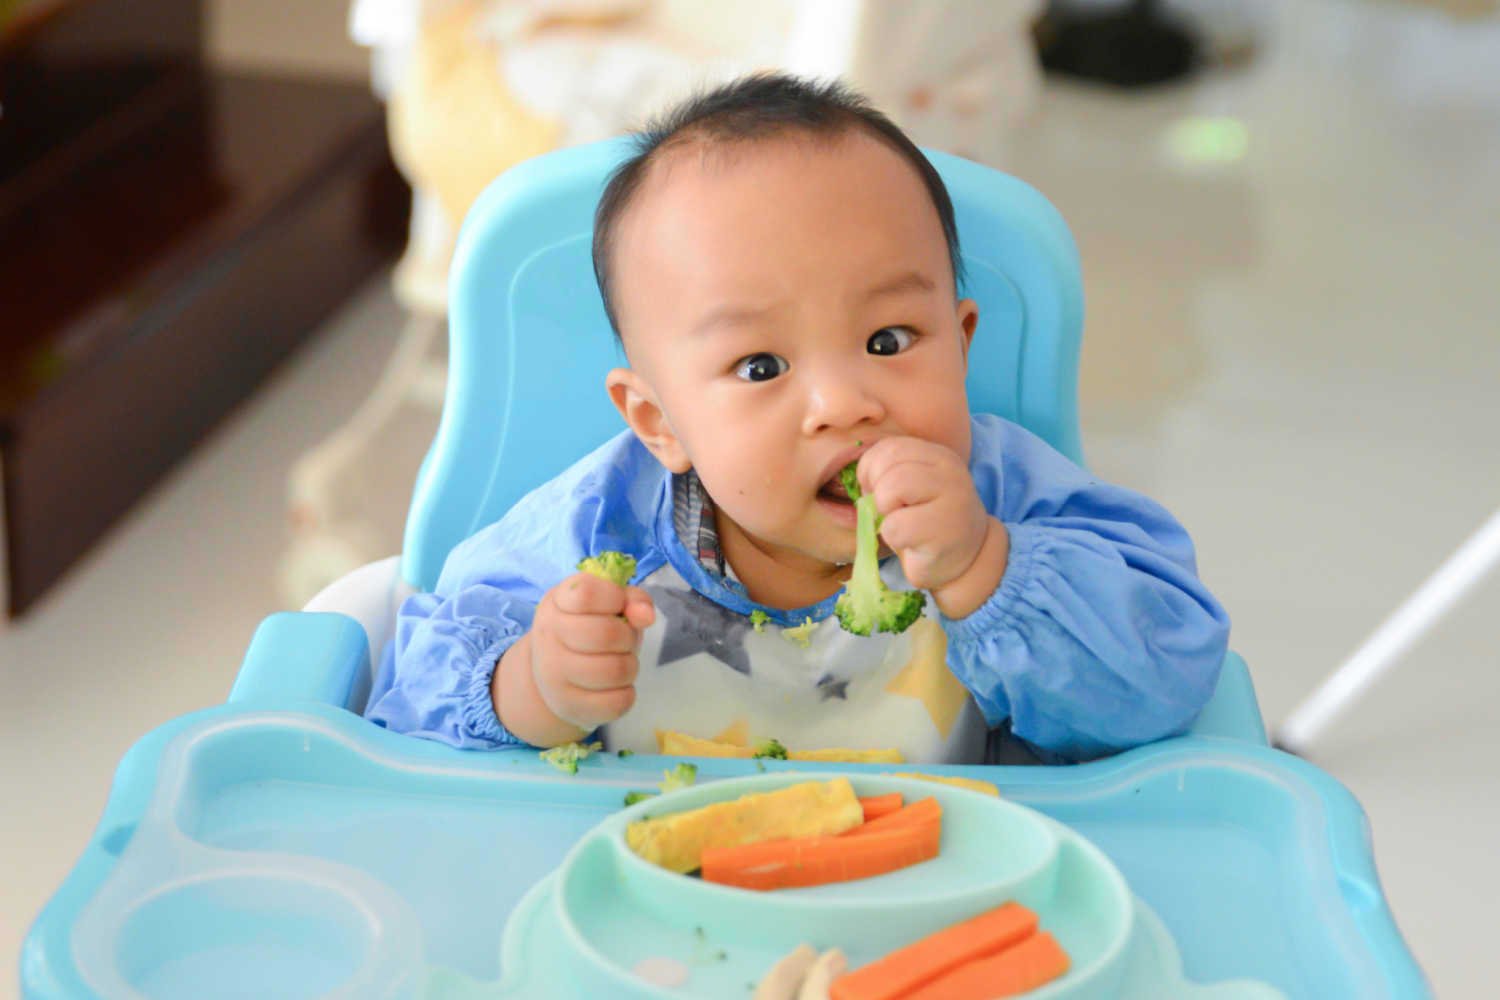 Baby Self-Feeding – When to Start, Stages and Safety Tips